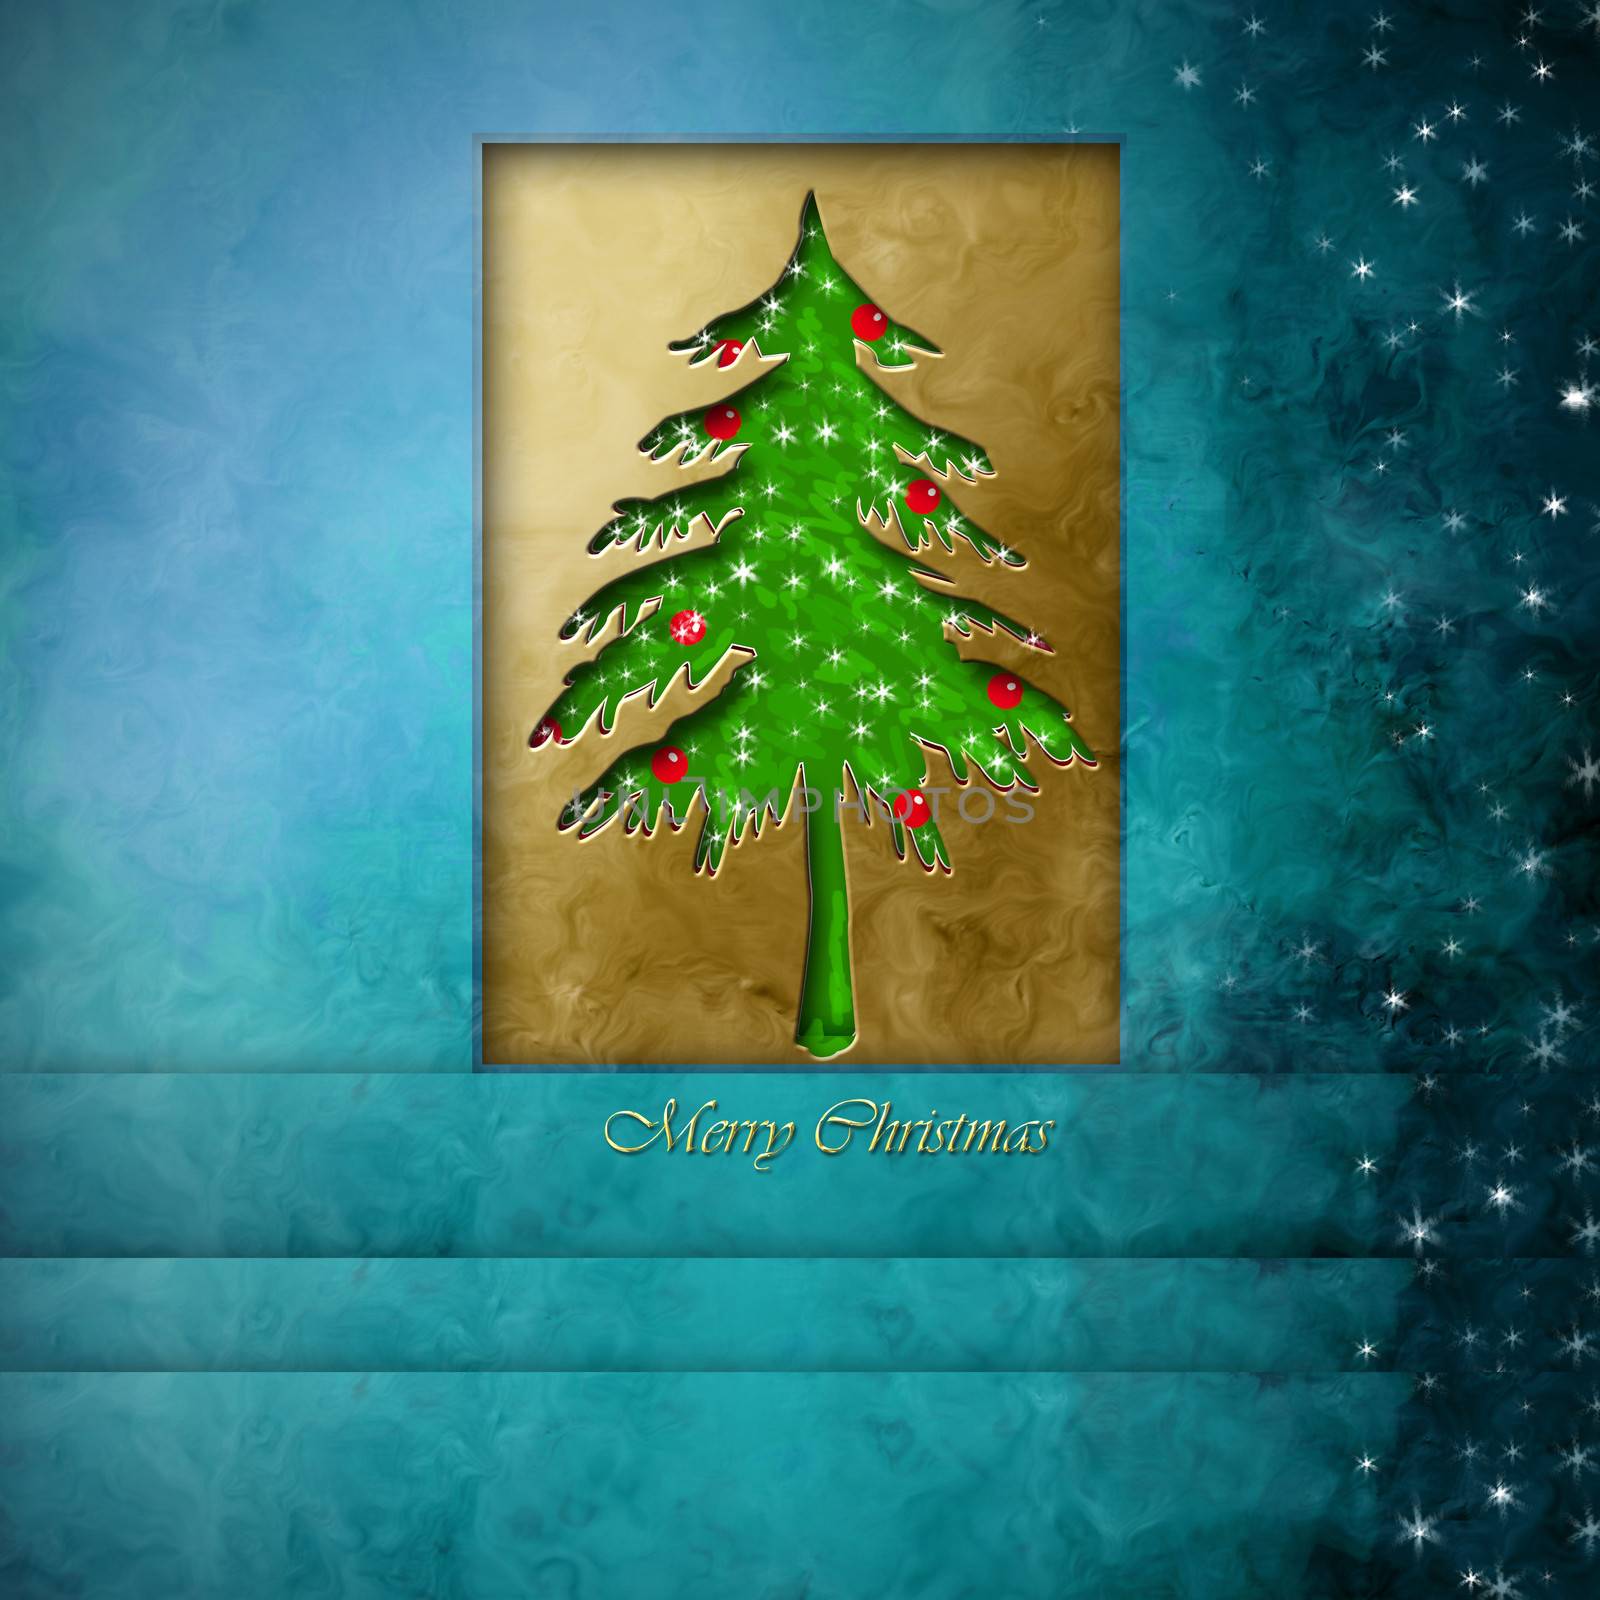 merry christmas card, fir on blue background with stars and empty space for message